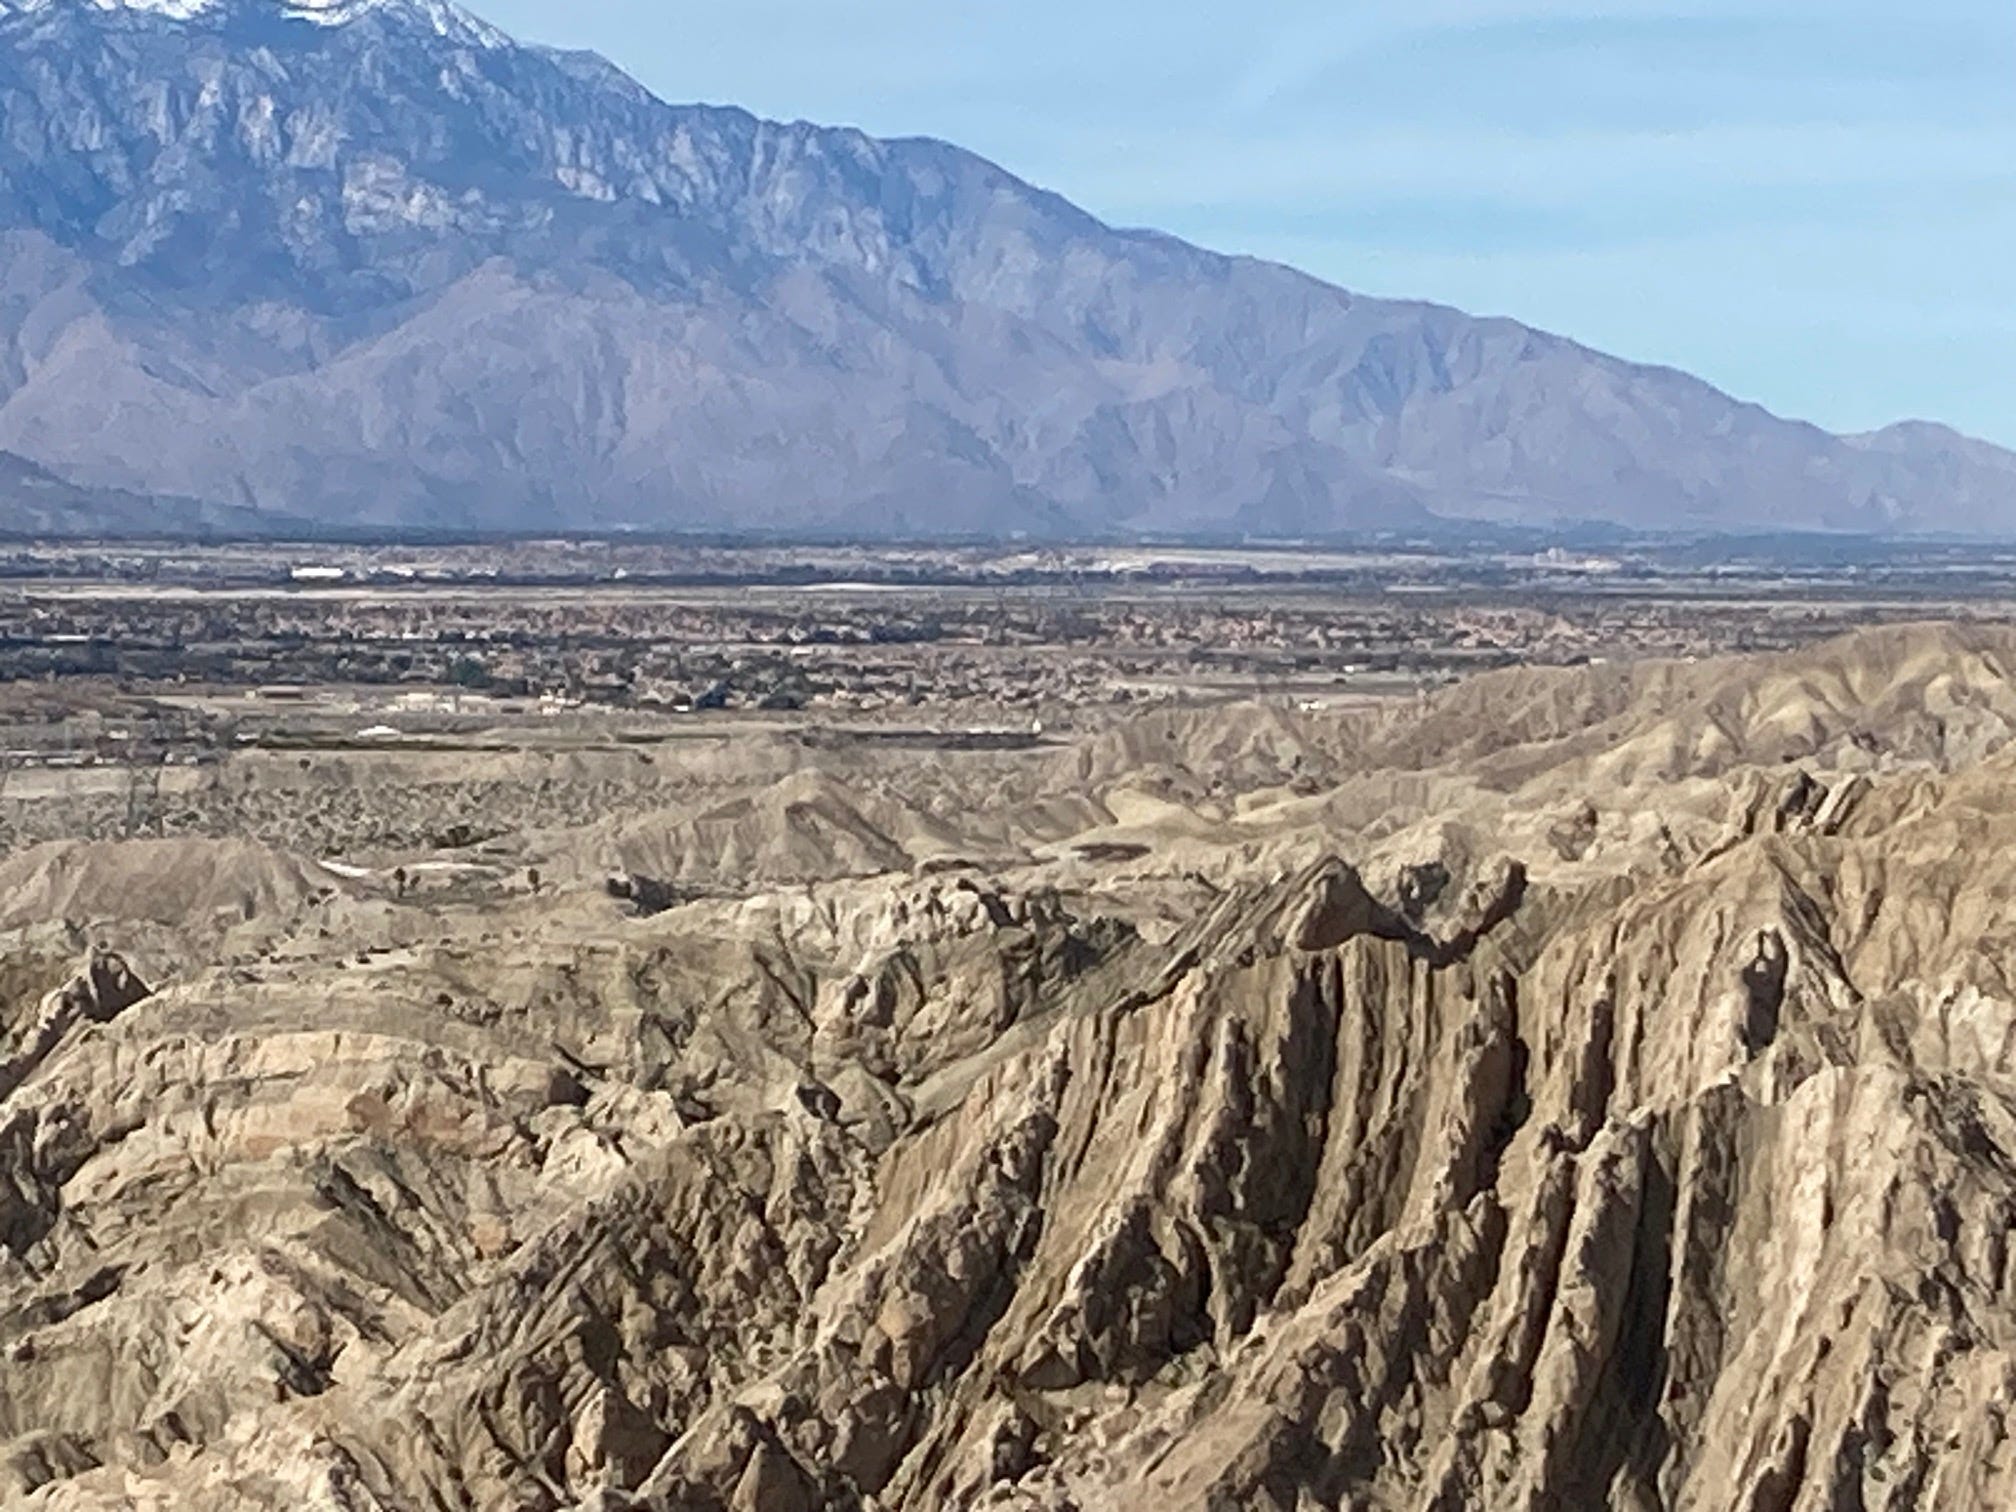 Rugged badlands and striated cliffs in the foreground near Coachella give way to desert communities in the midground and towering mountains in the background.